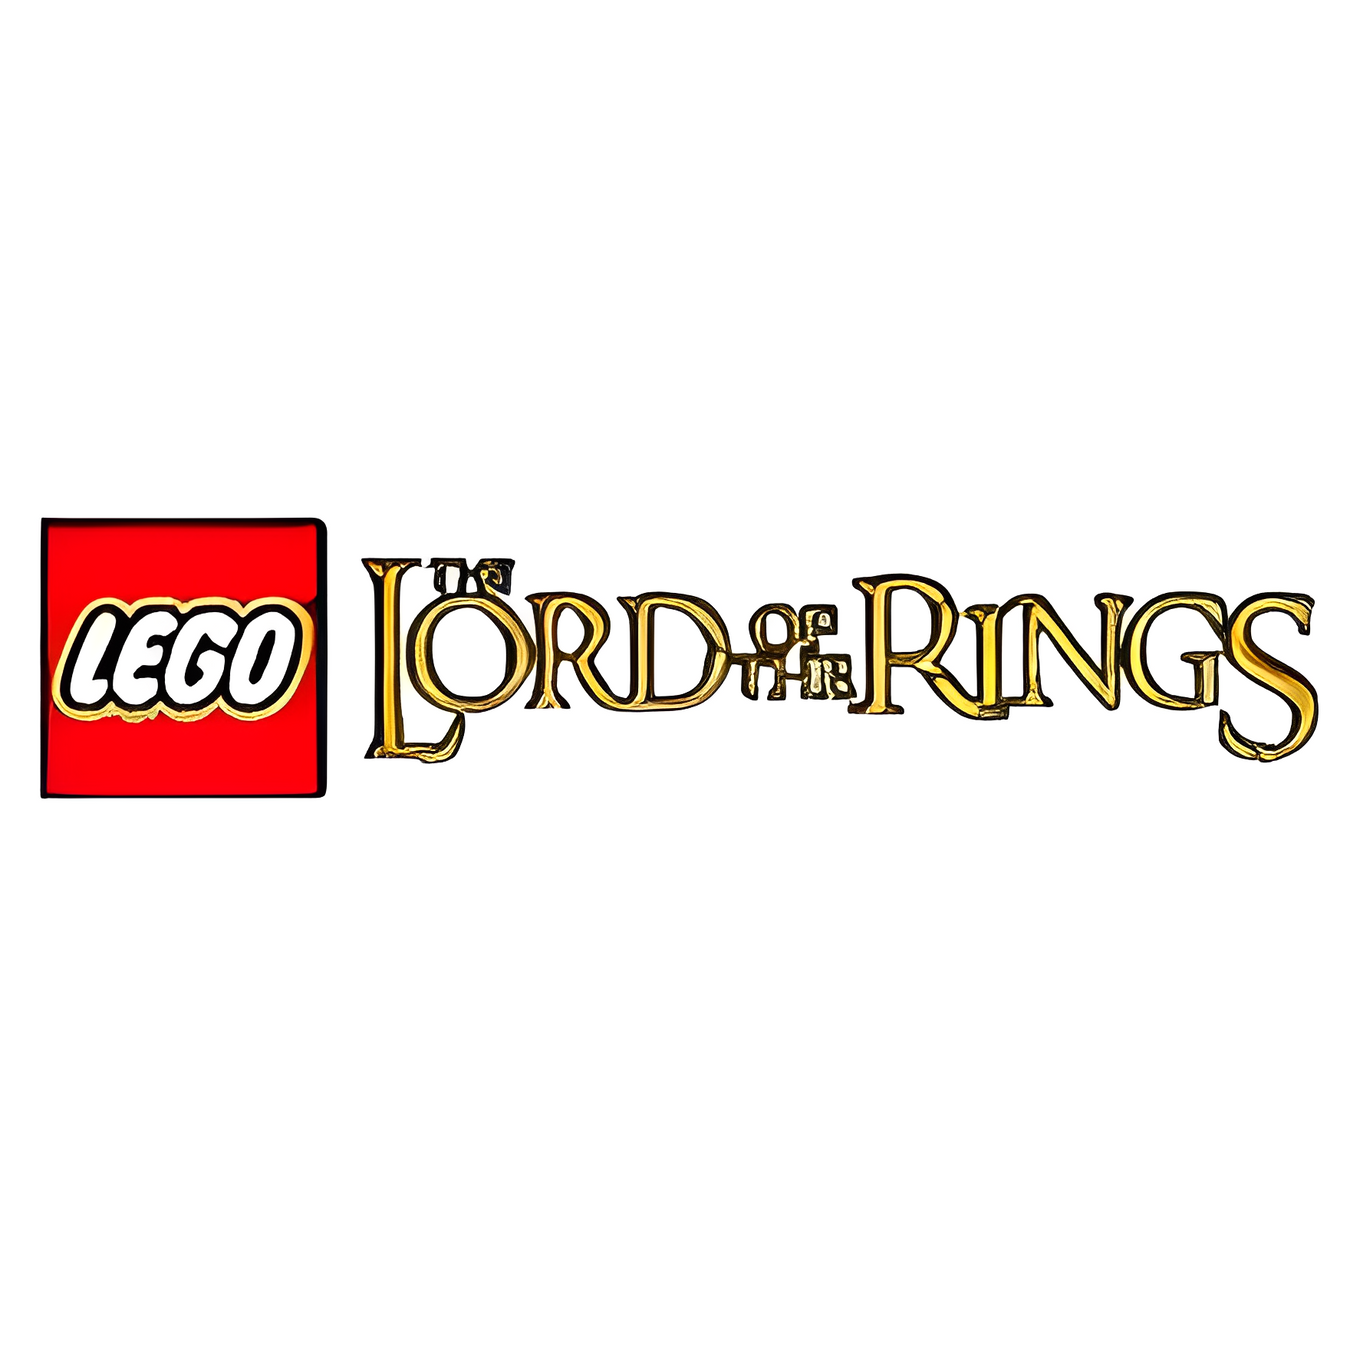 LEGO The Lord of the Rings Sets